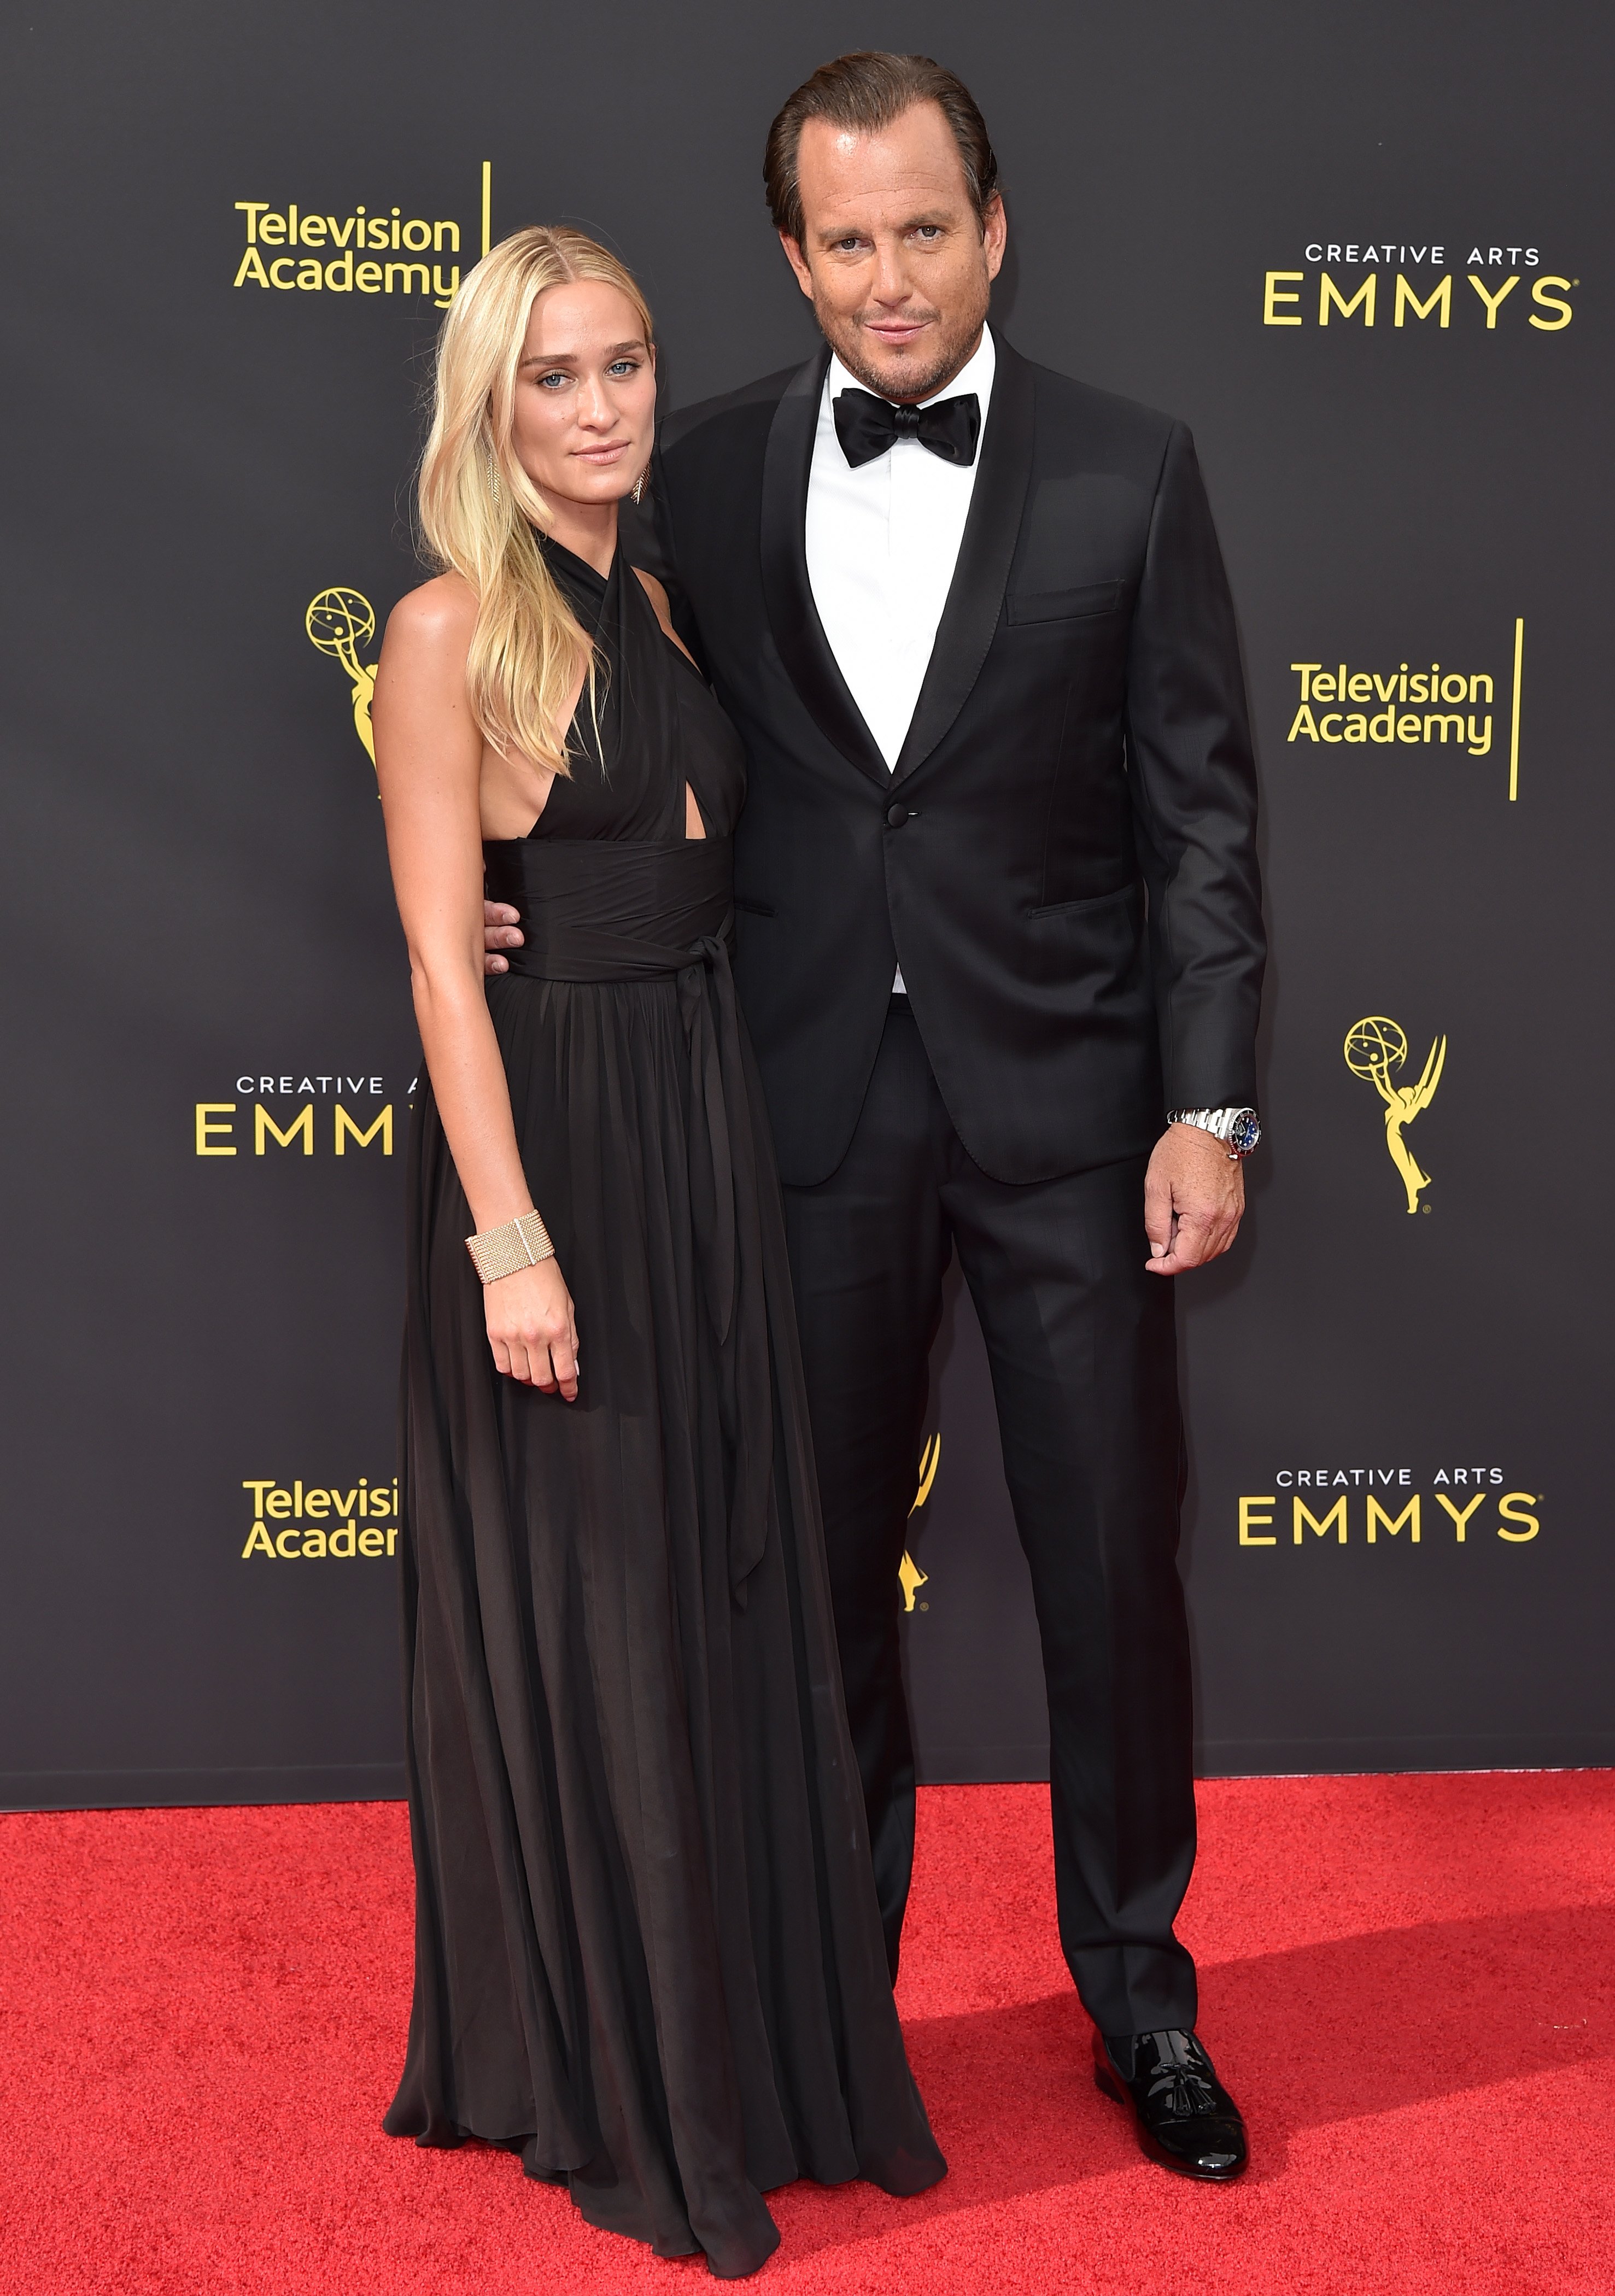 Alessandra Brawn and Will Arnett at the 2019 Creative Arts Emmy Awards on September 14, 2019, in California. | Source: Getty Images